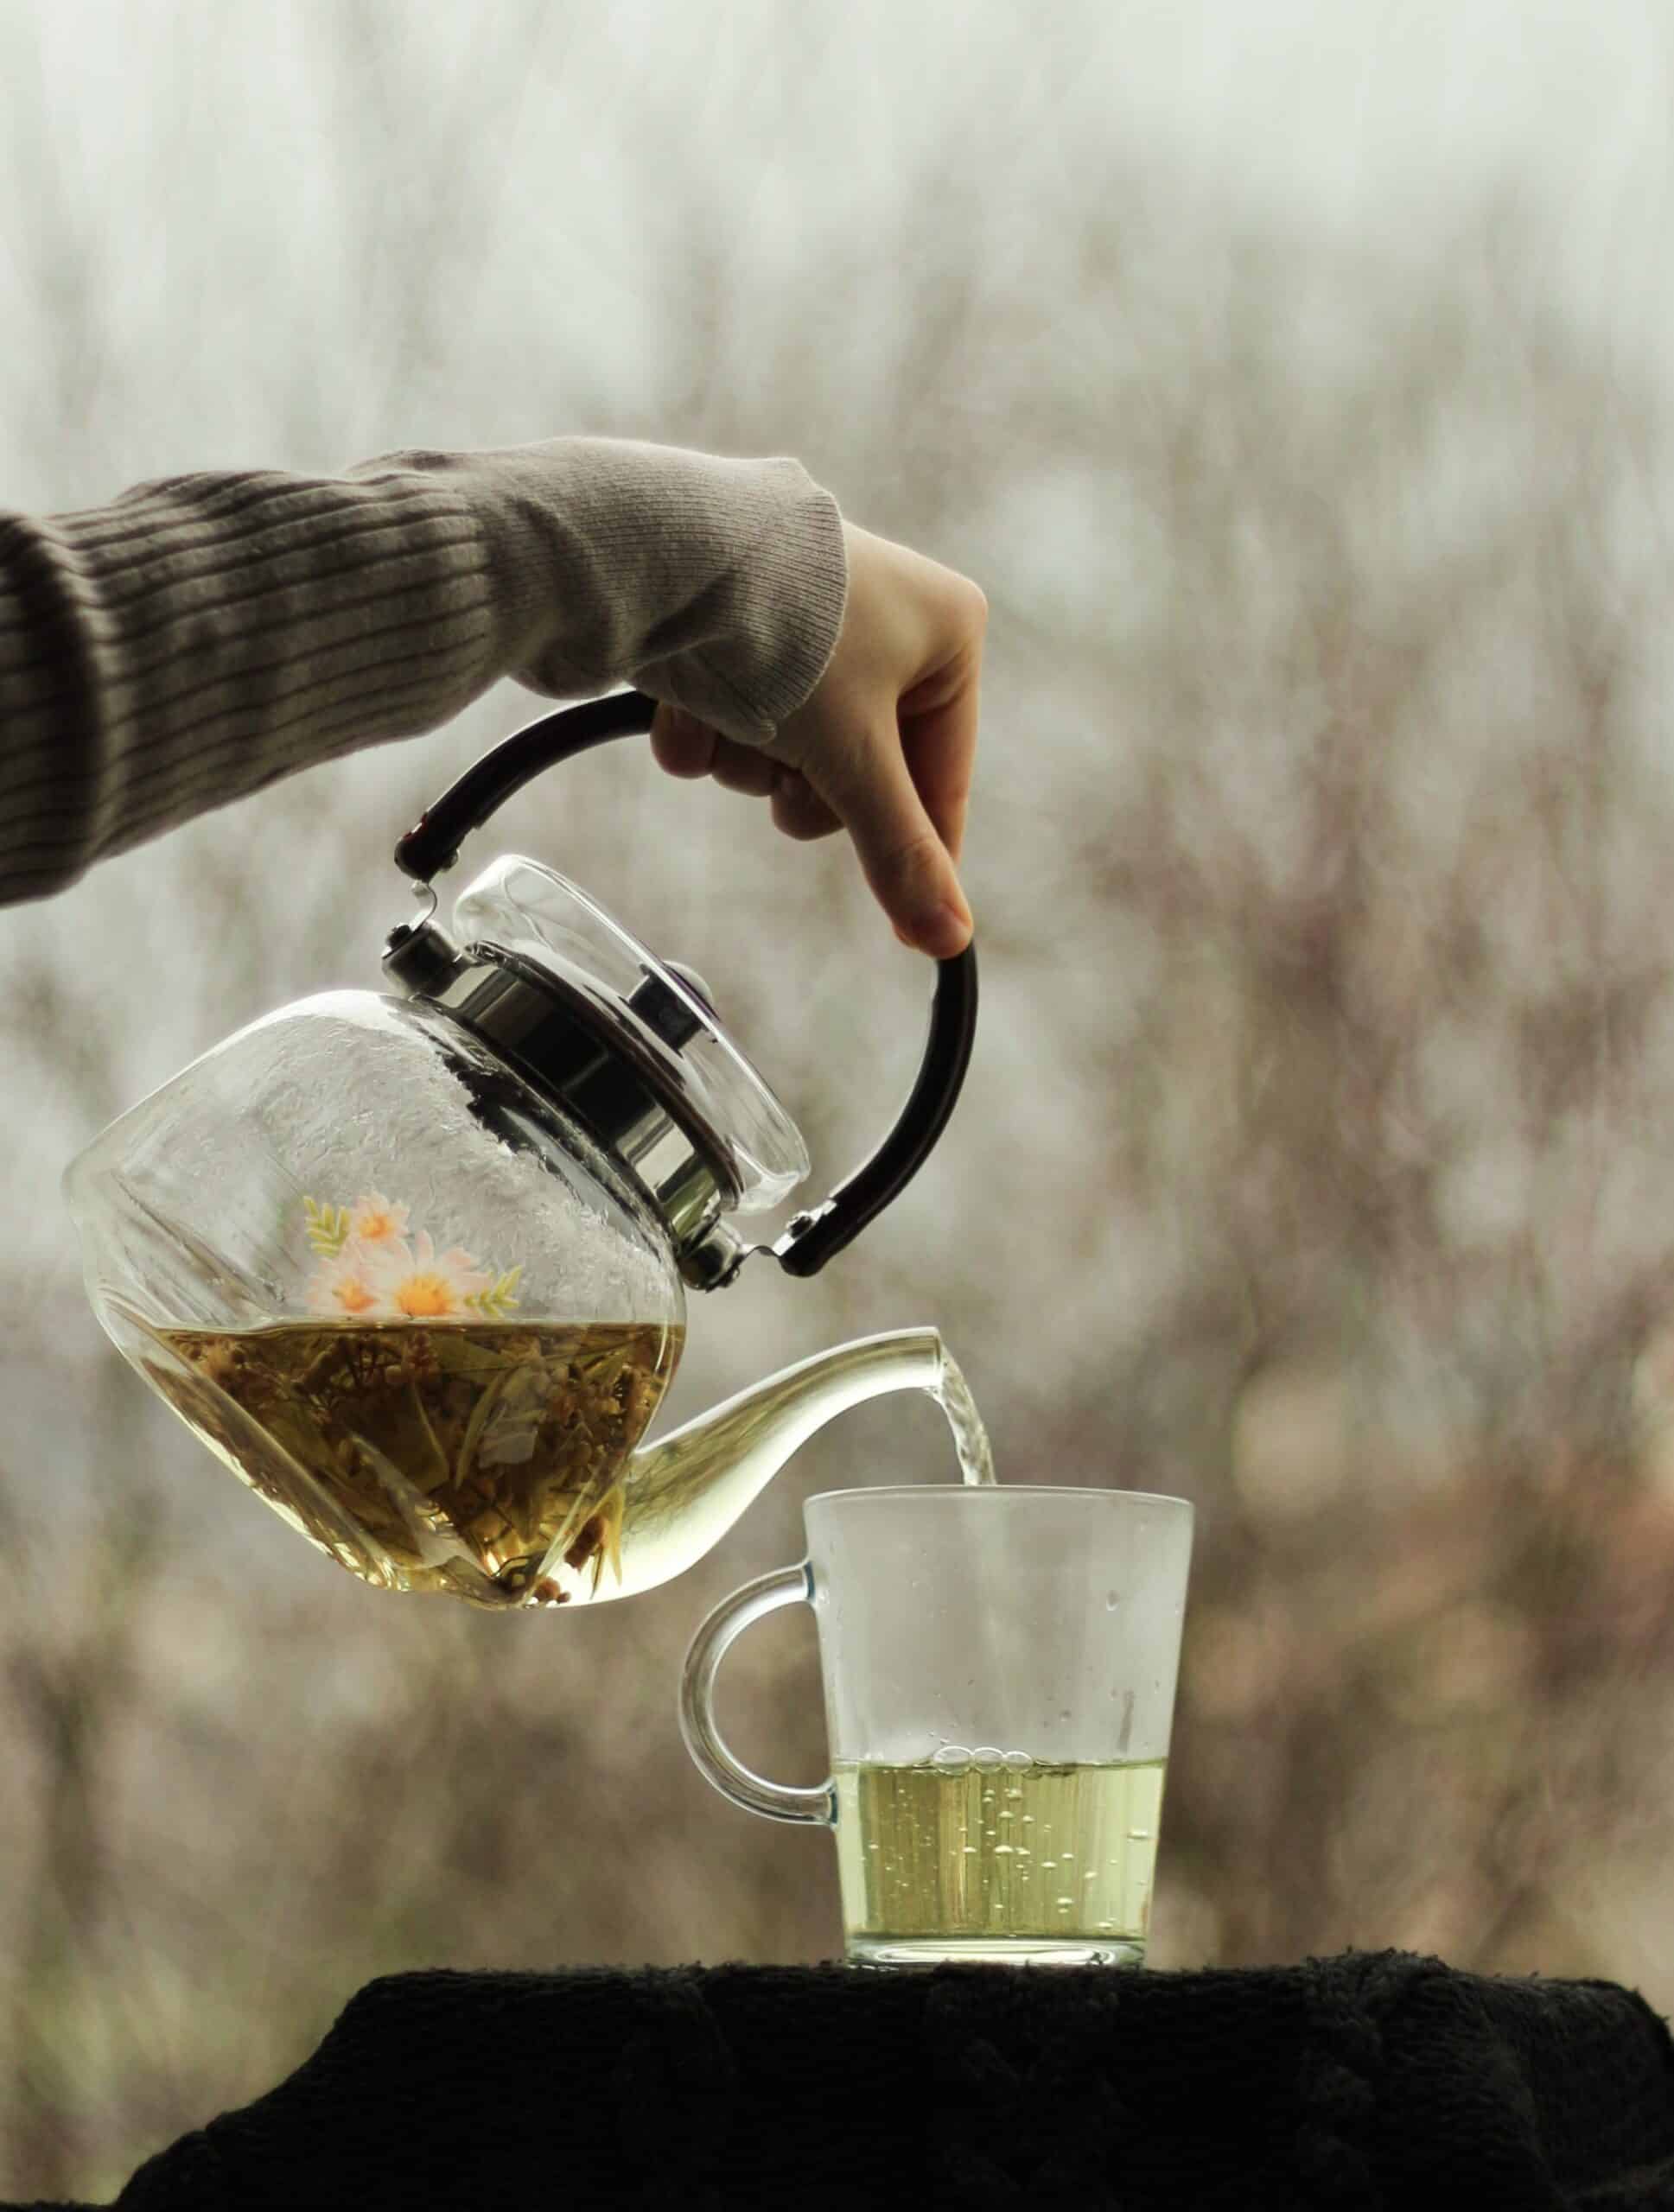 pour keto tea in your cup and enjoy the moment